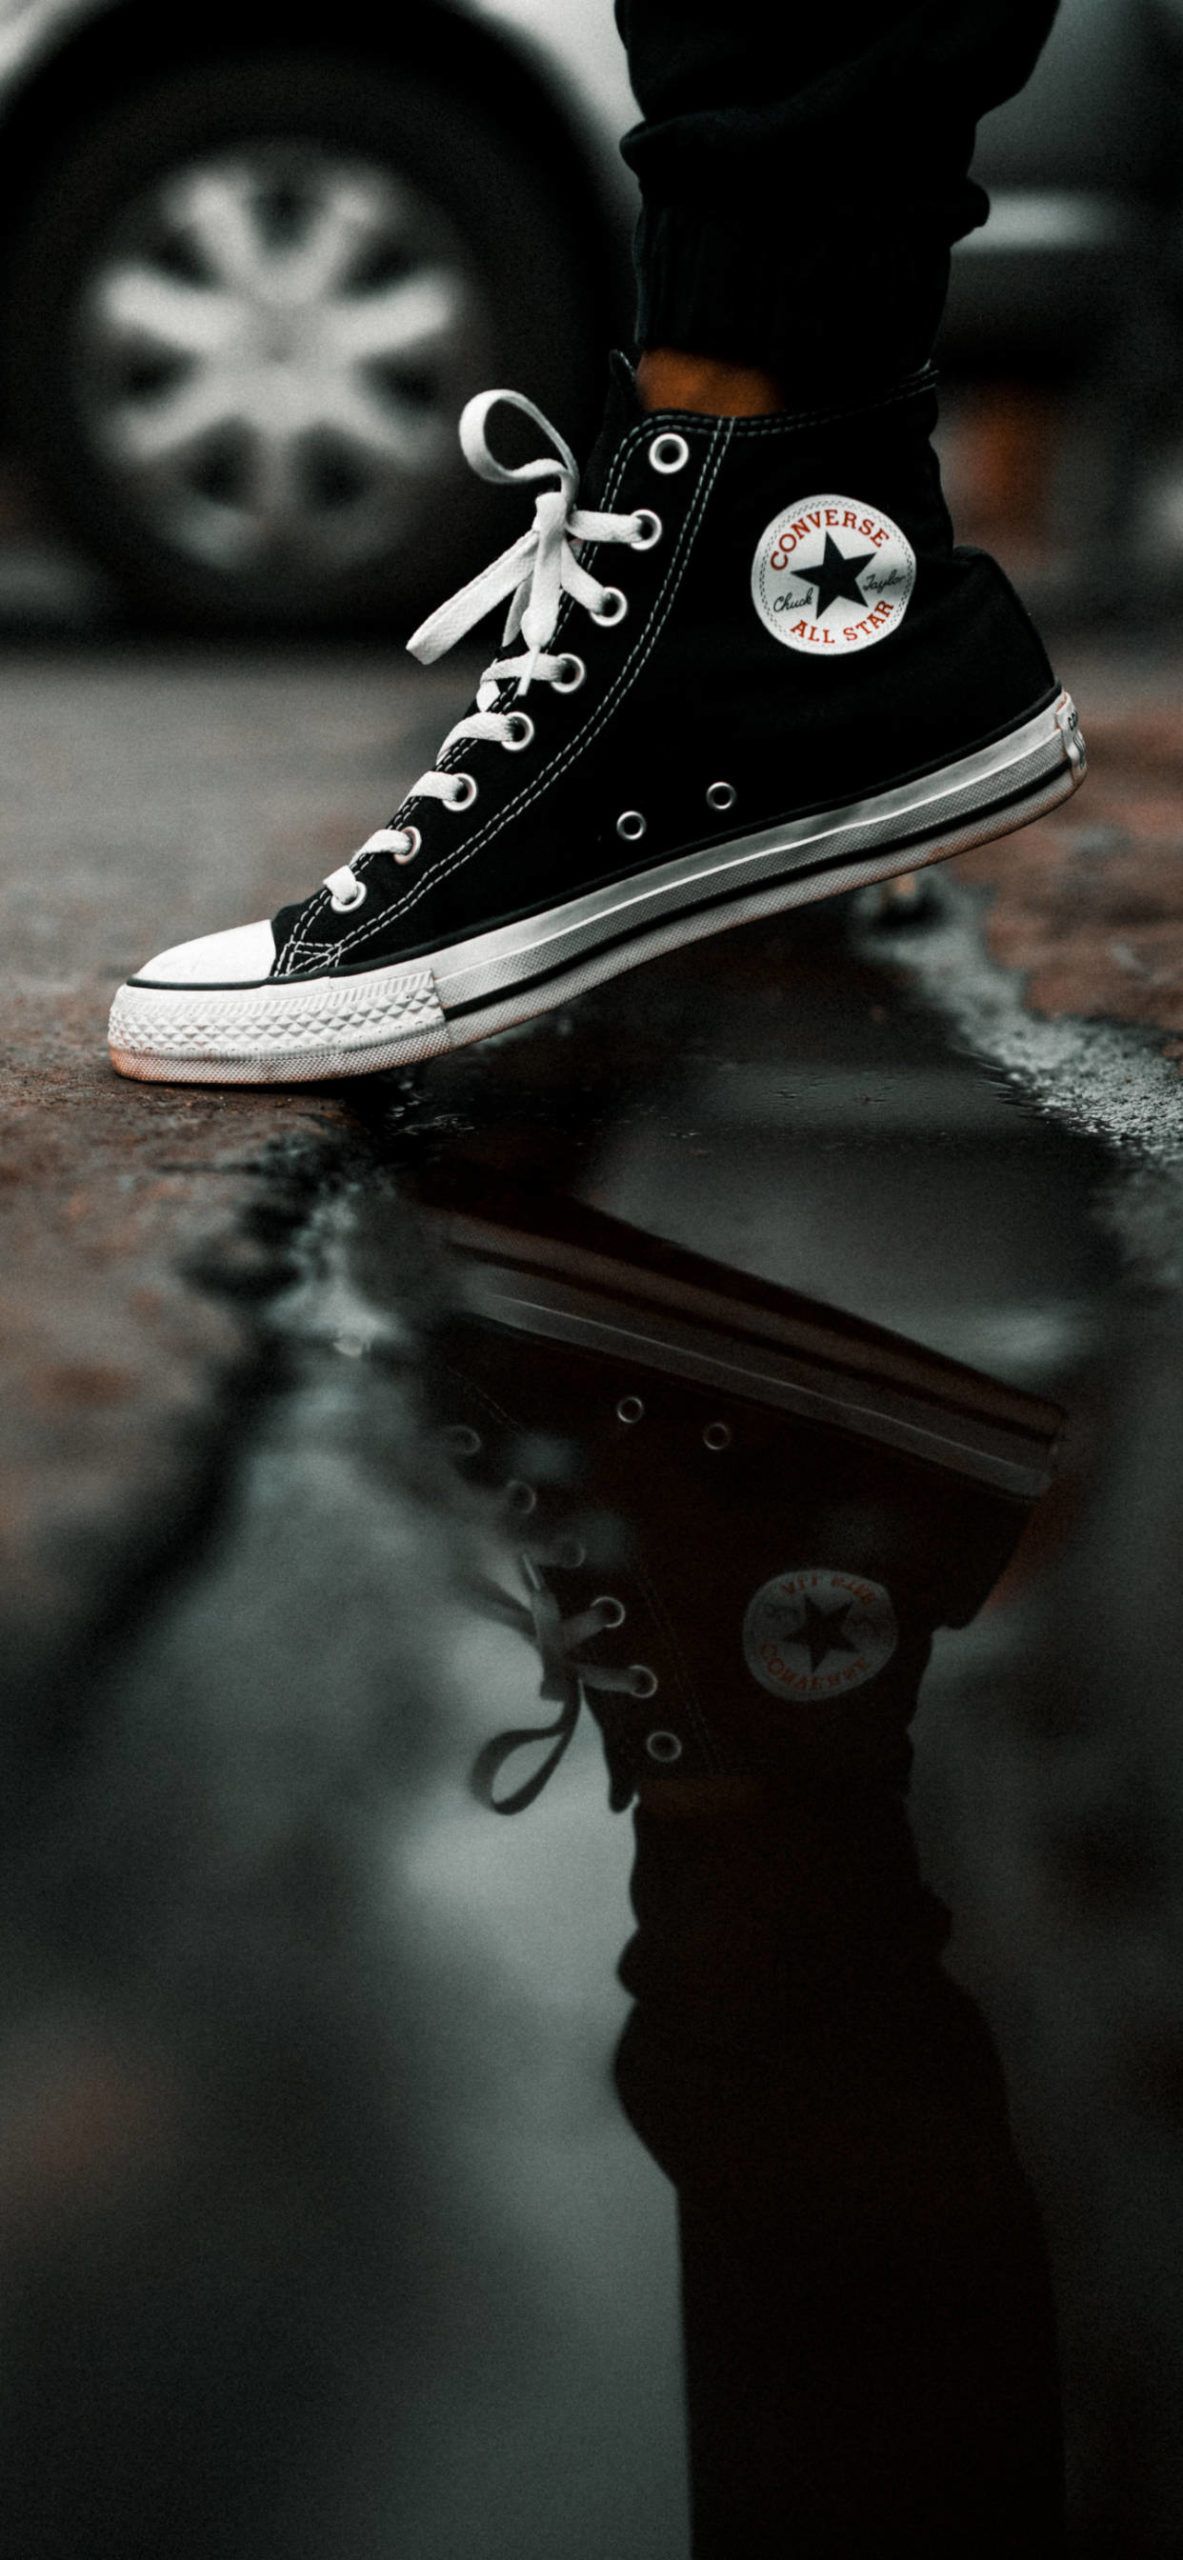 A person is standing on the ground with their shoes in mid air - Converse